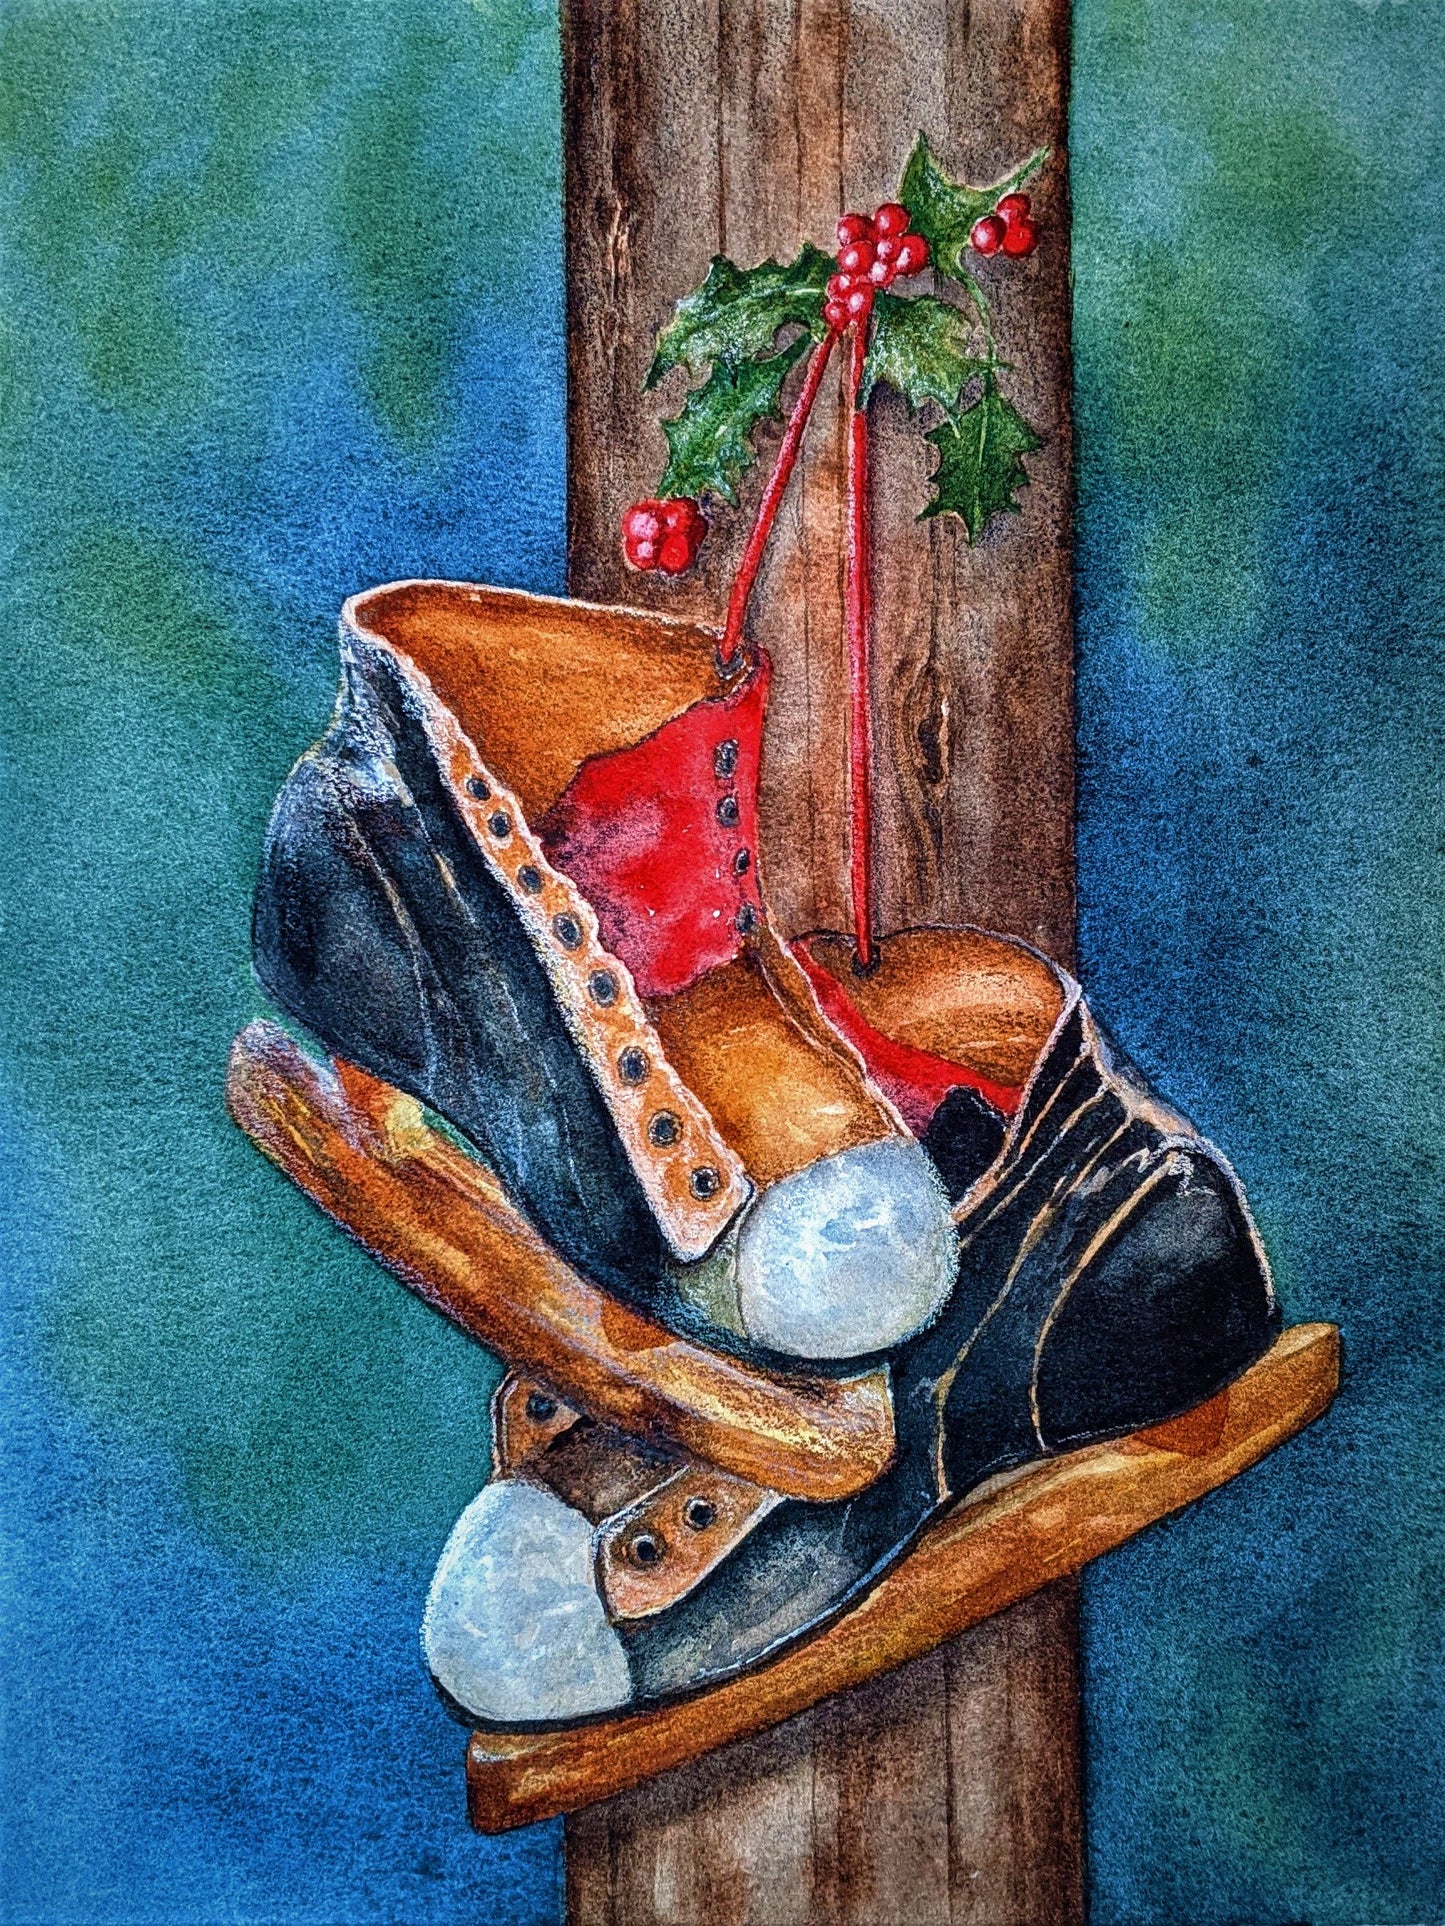 Vintage Skates watercolor painting on paper